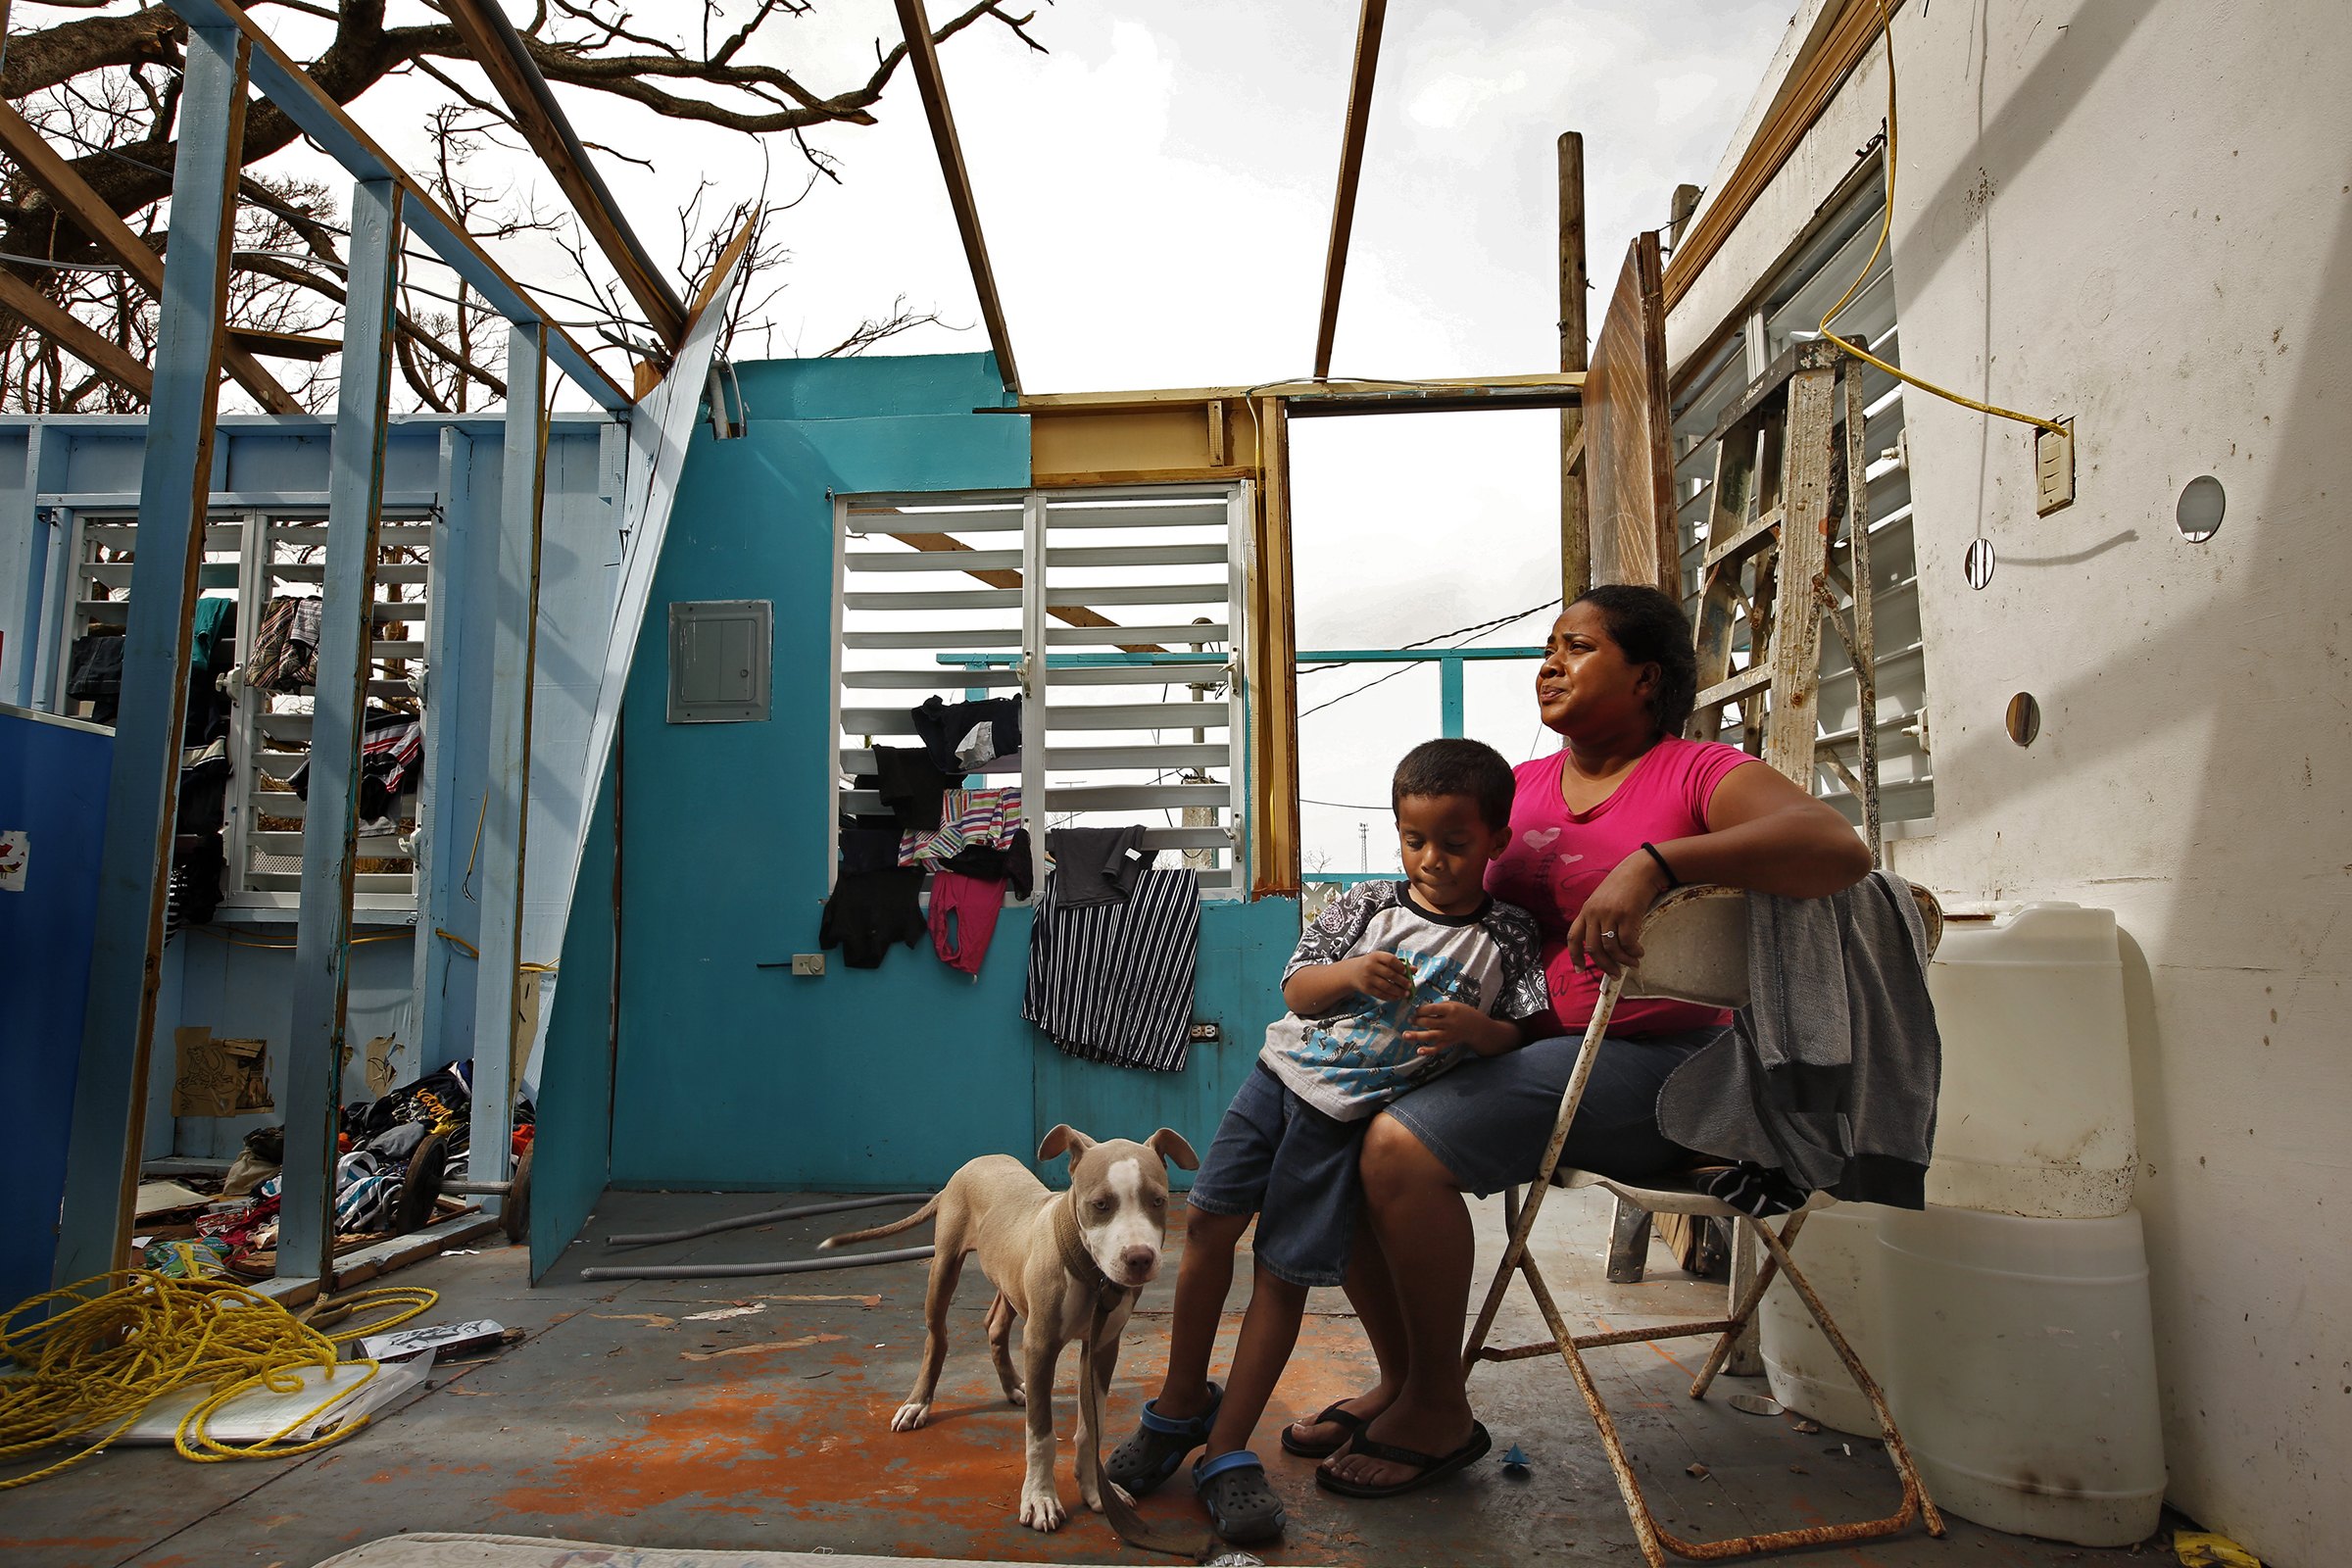 Heydee Perez, age 29, and her son, Yenel Calera, age 4 have not received any aid one week after Hurricane Maria. The roof of their home is gone and they have very little to eat. (Carolyn Cole—LA Times/Getty Images)